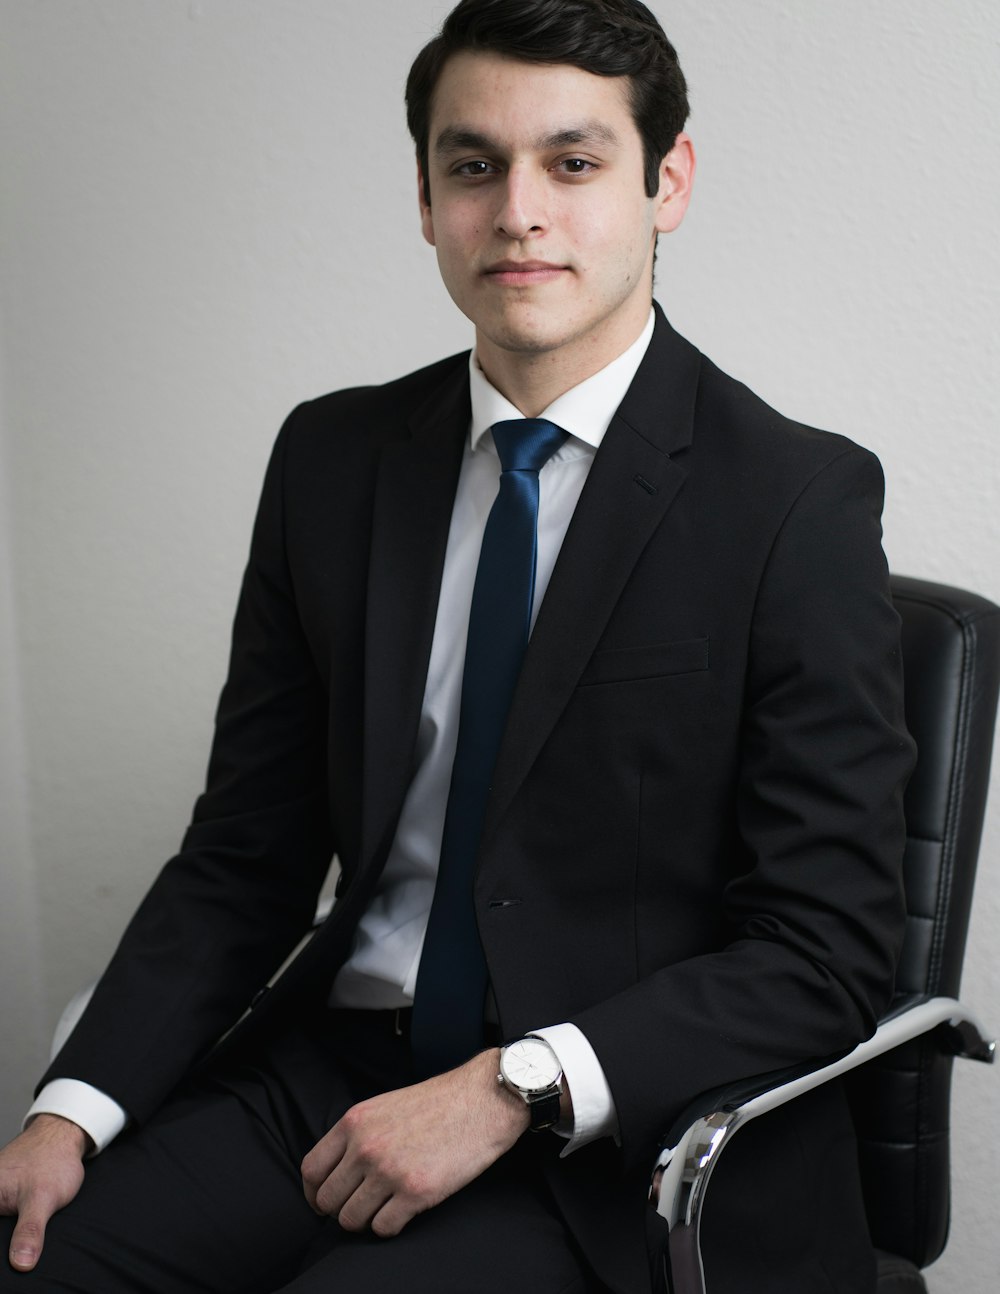 man in black suit sitting on chair